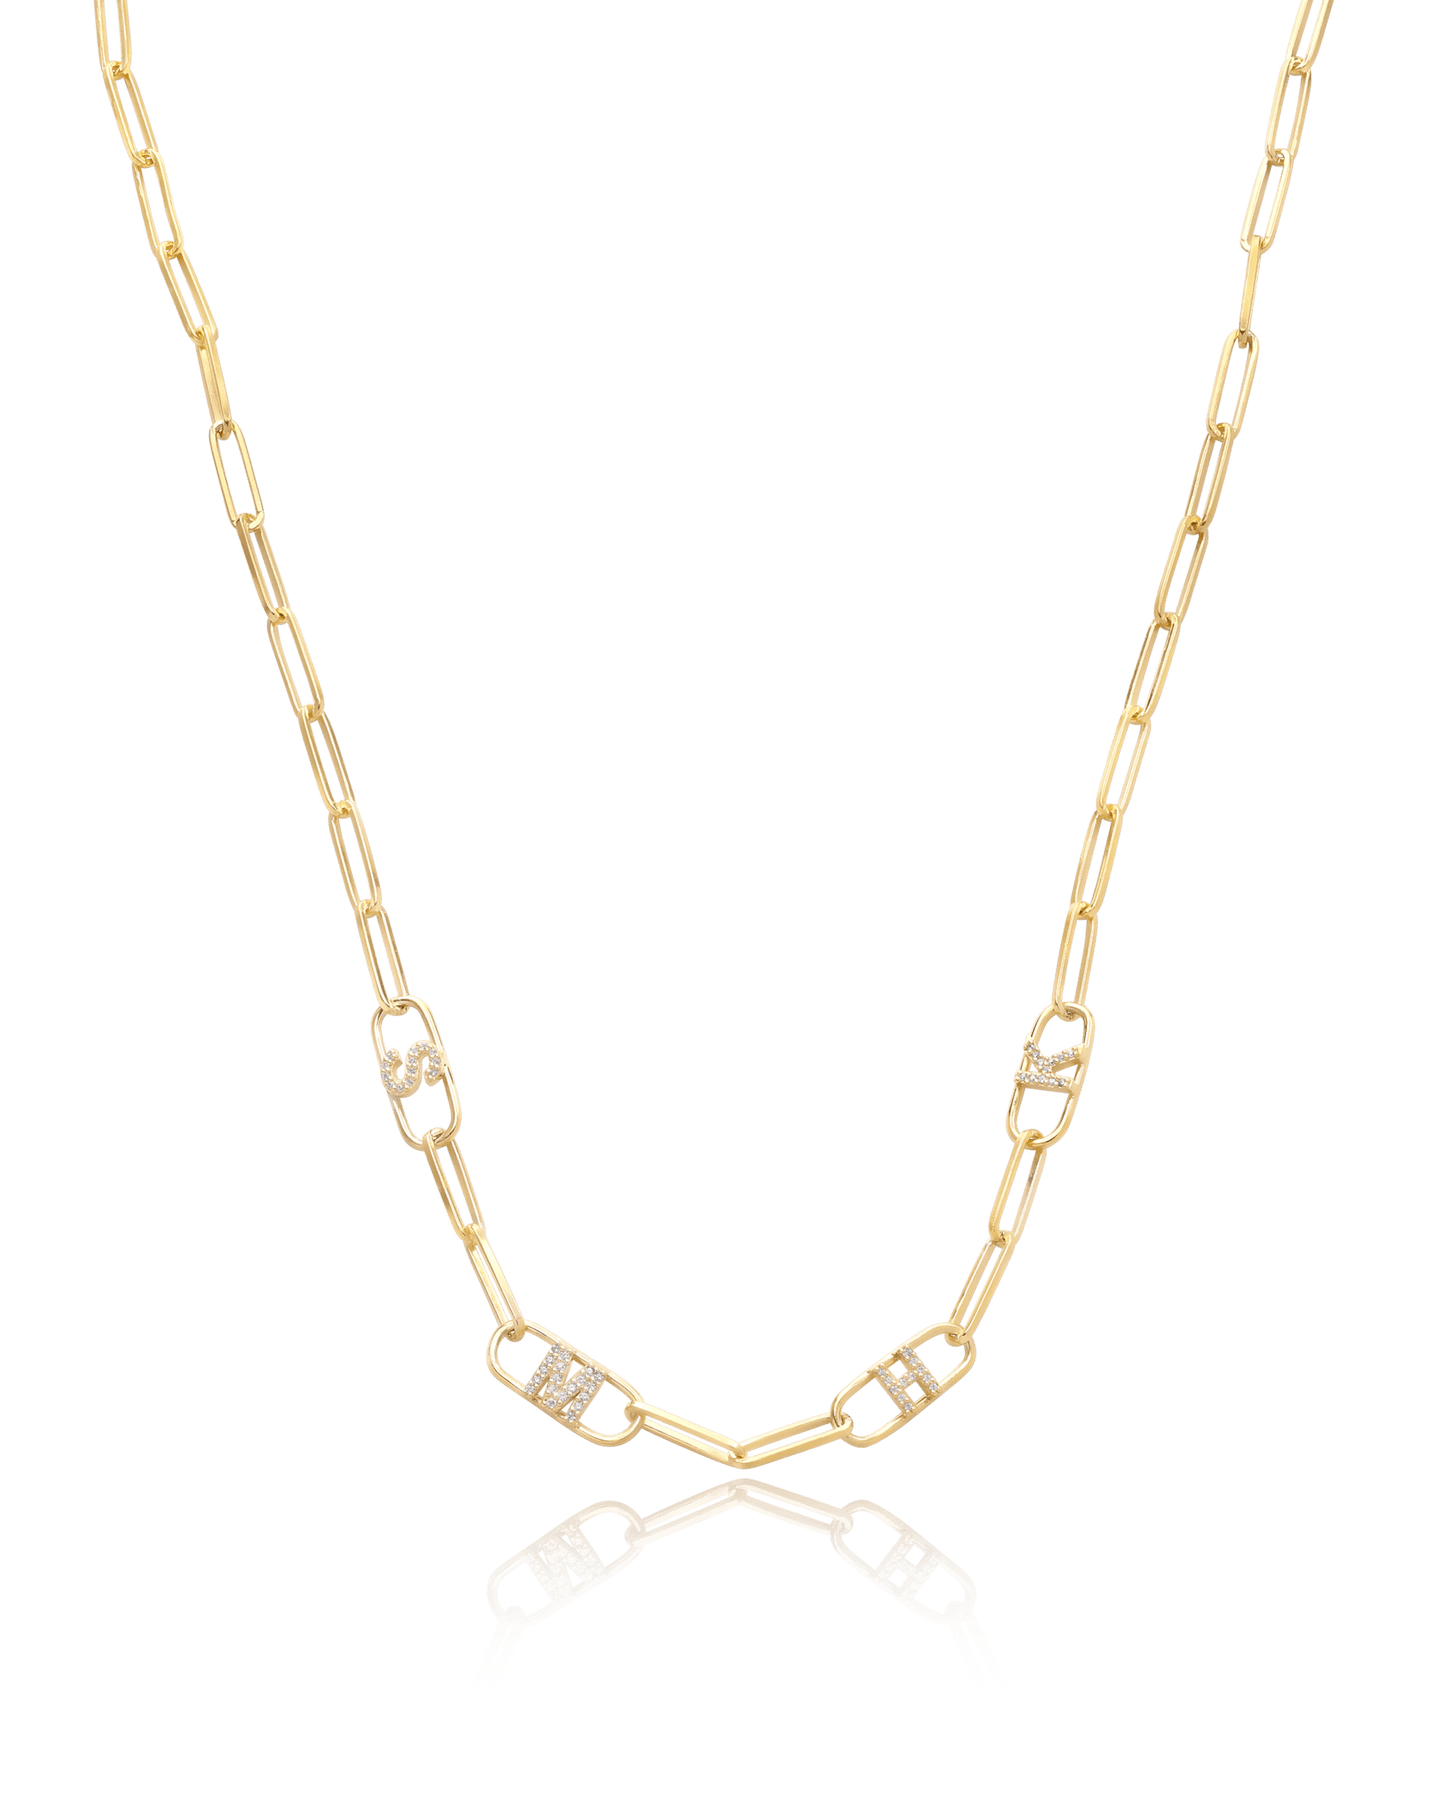 Initials Link Necklace - 925 Sterling Silver Necklaces magal-dev 